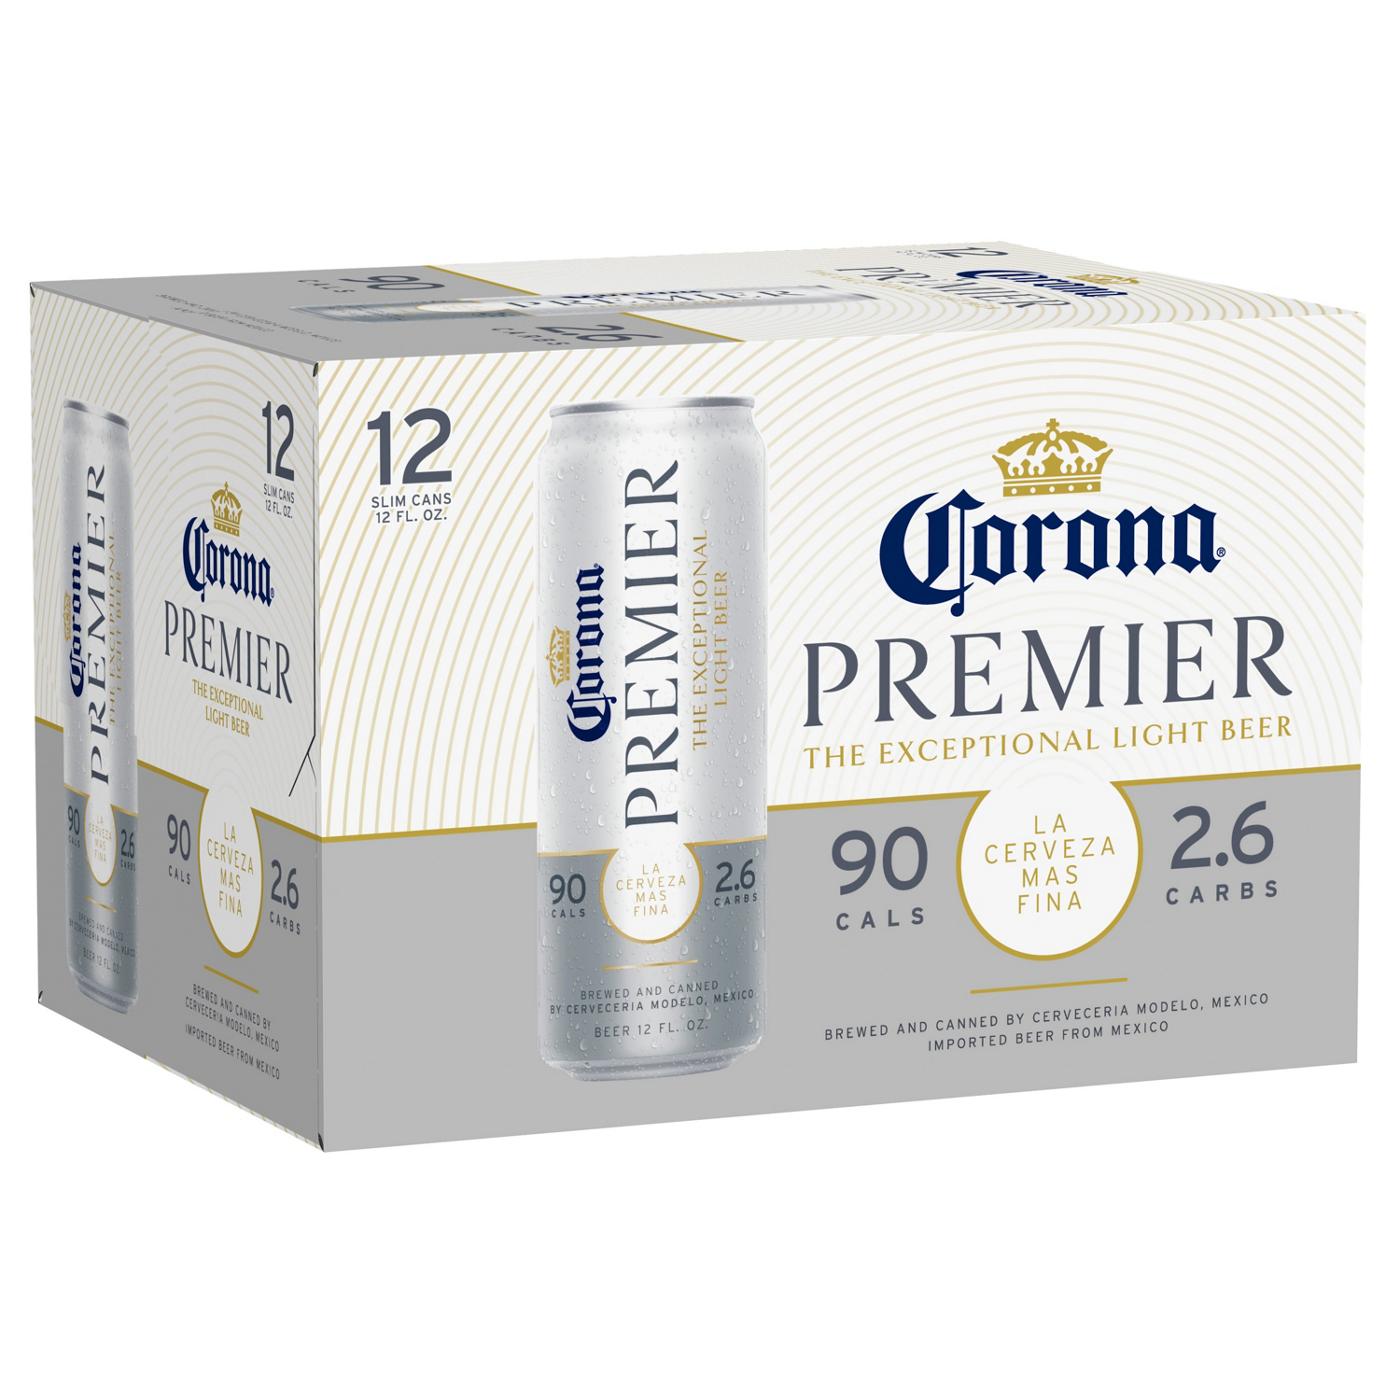 Corona Premier Mexican Lager Import Light Beer 12 oz Cans, 12 pk; image 1 of 9